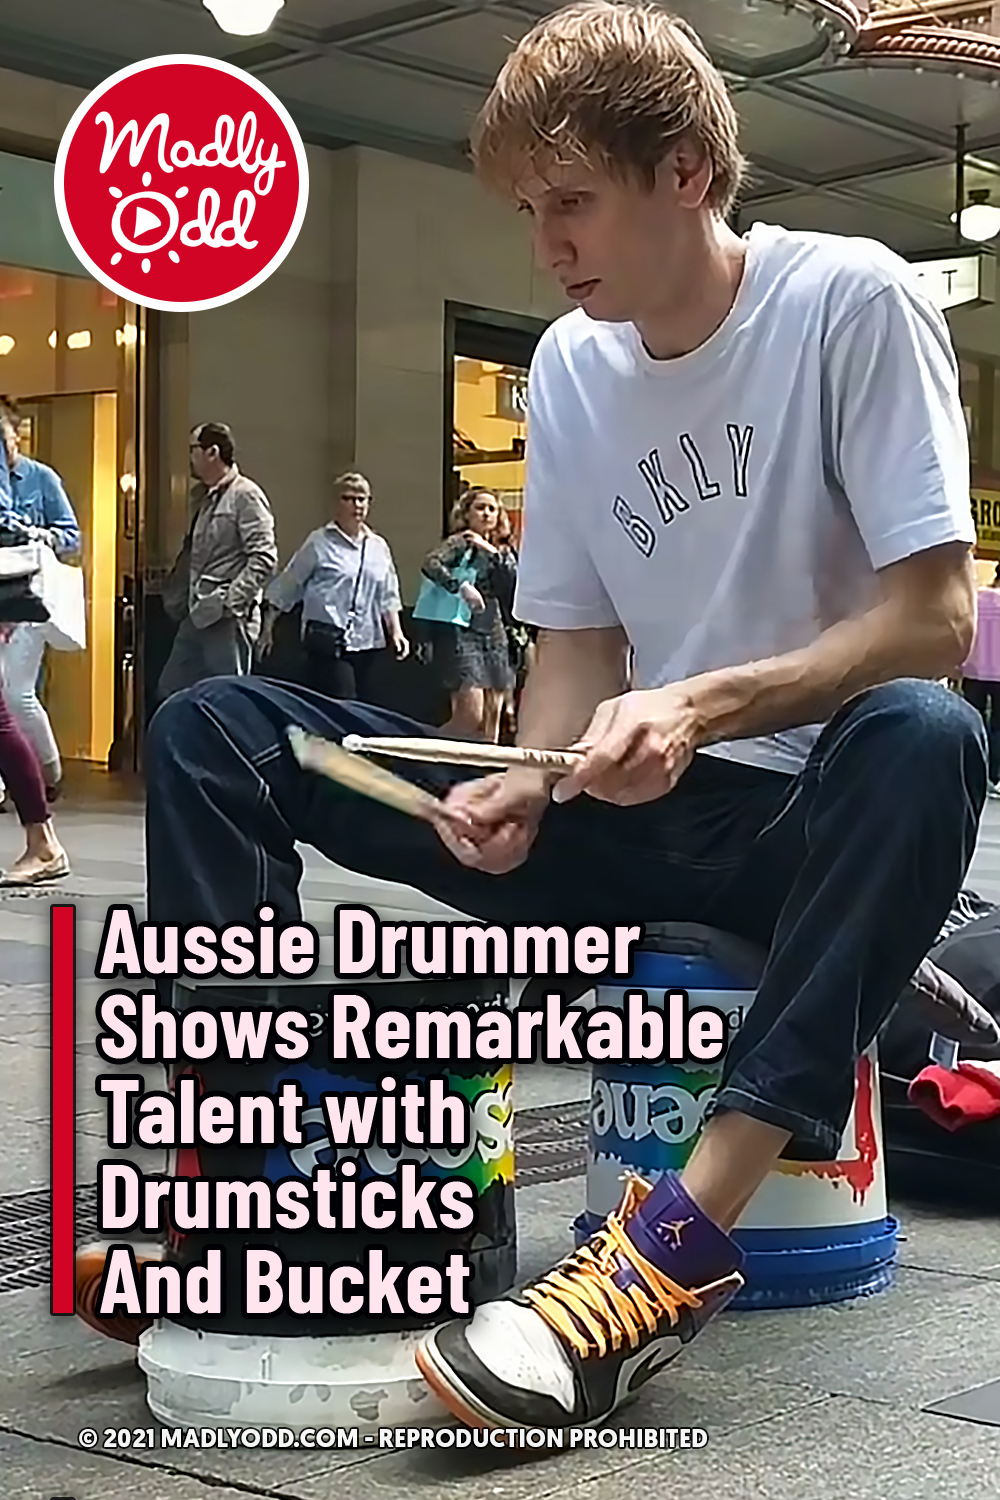 Aussie Drummer Shows Remarkable Talent with Drumsticks And Bucket